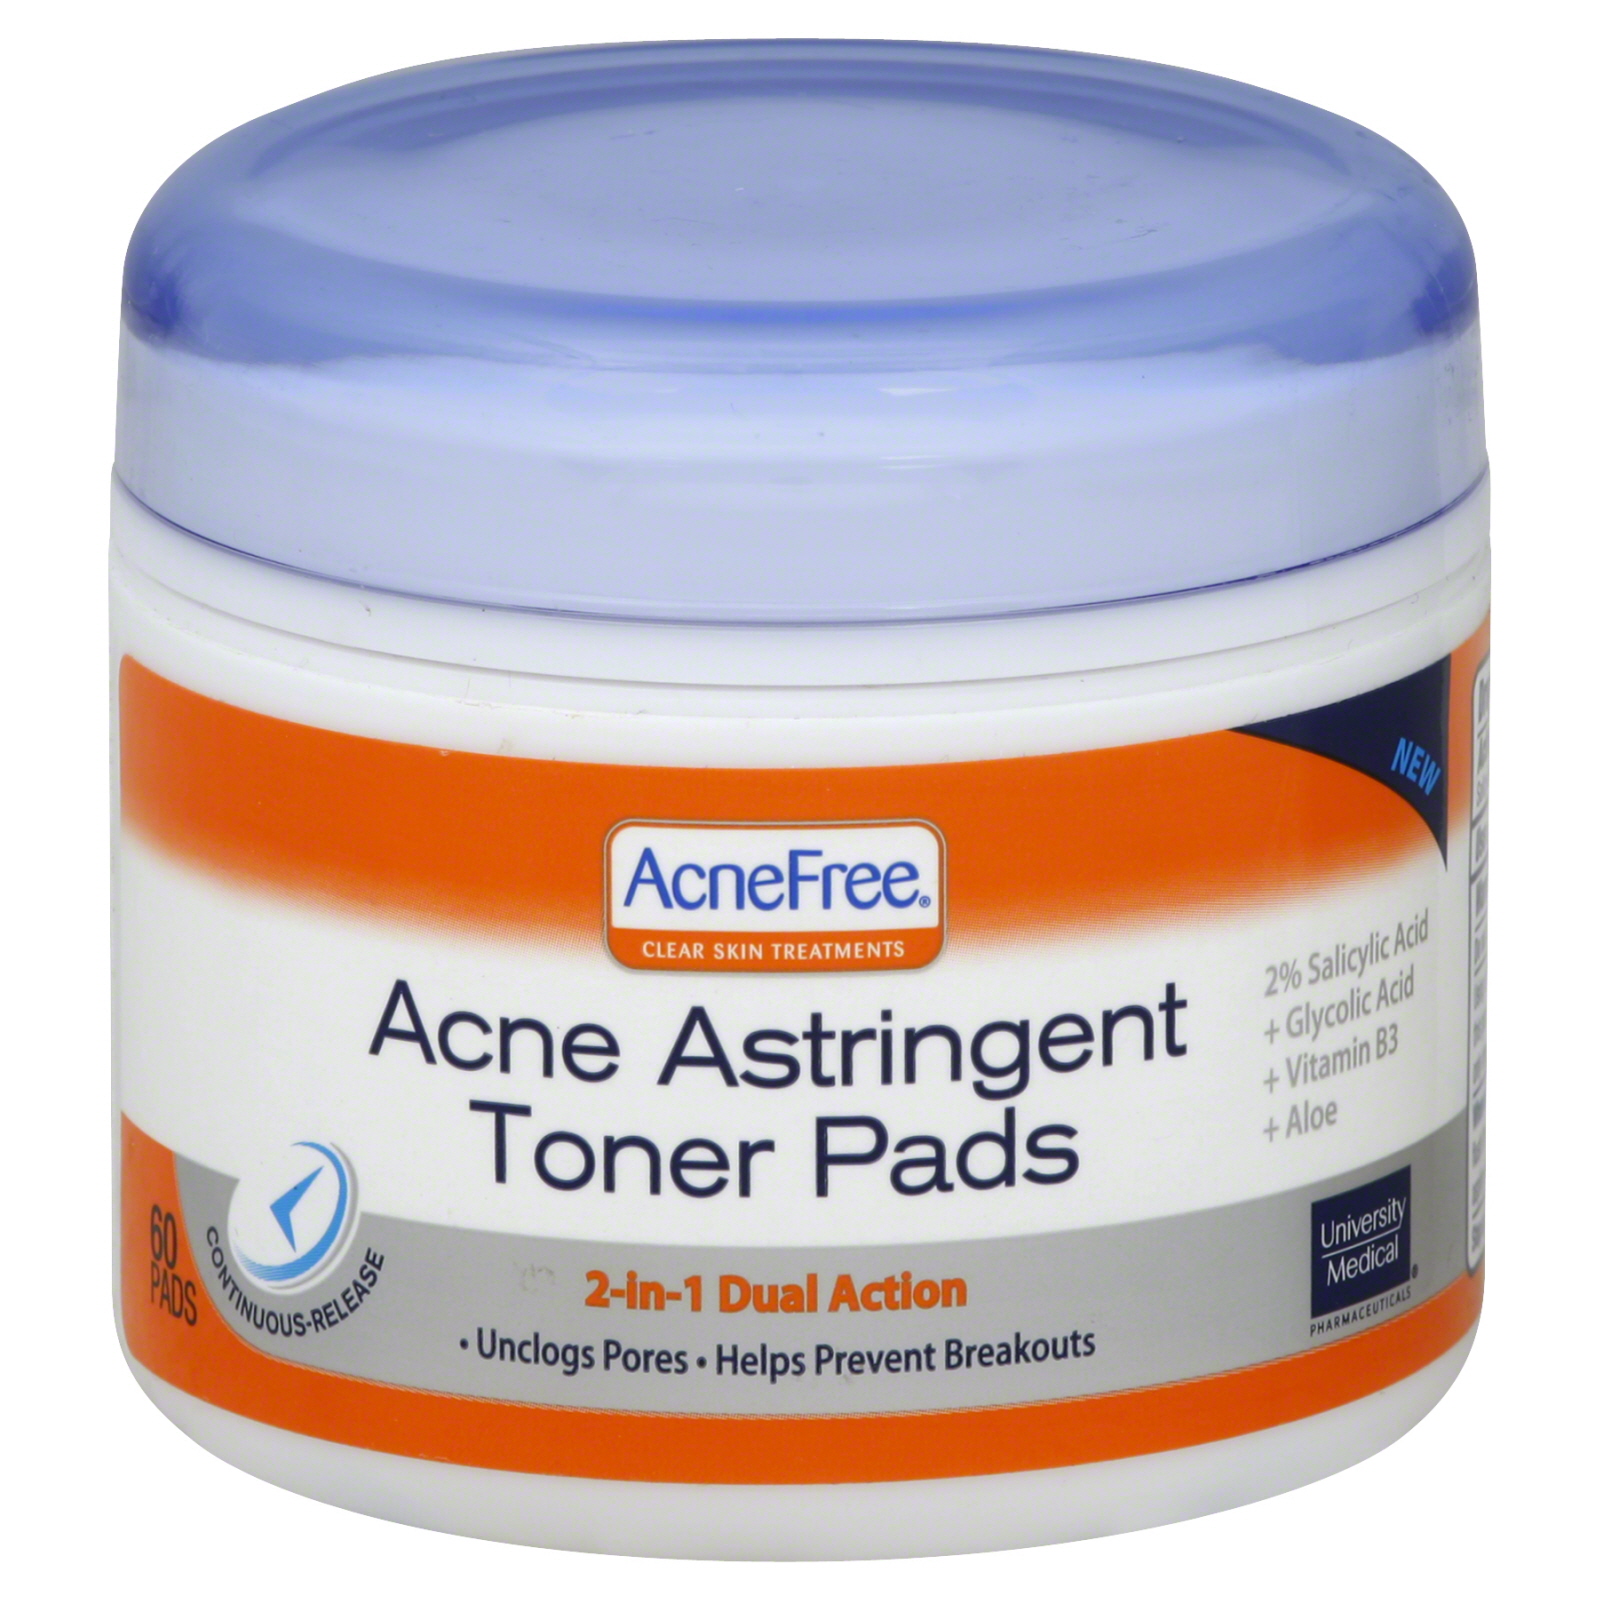 AcneFree Acne Astringent Toner Pads, 60 Pads